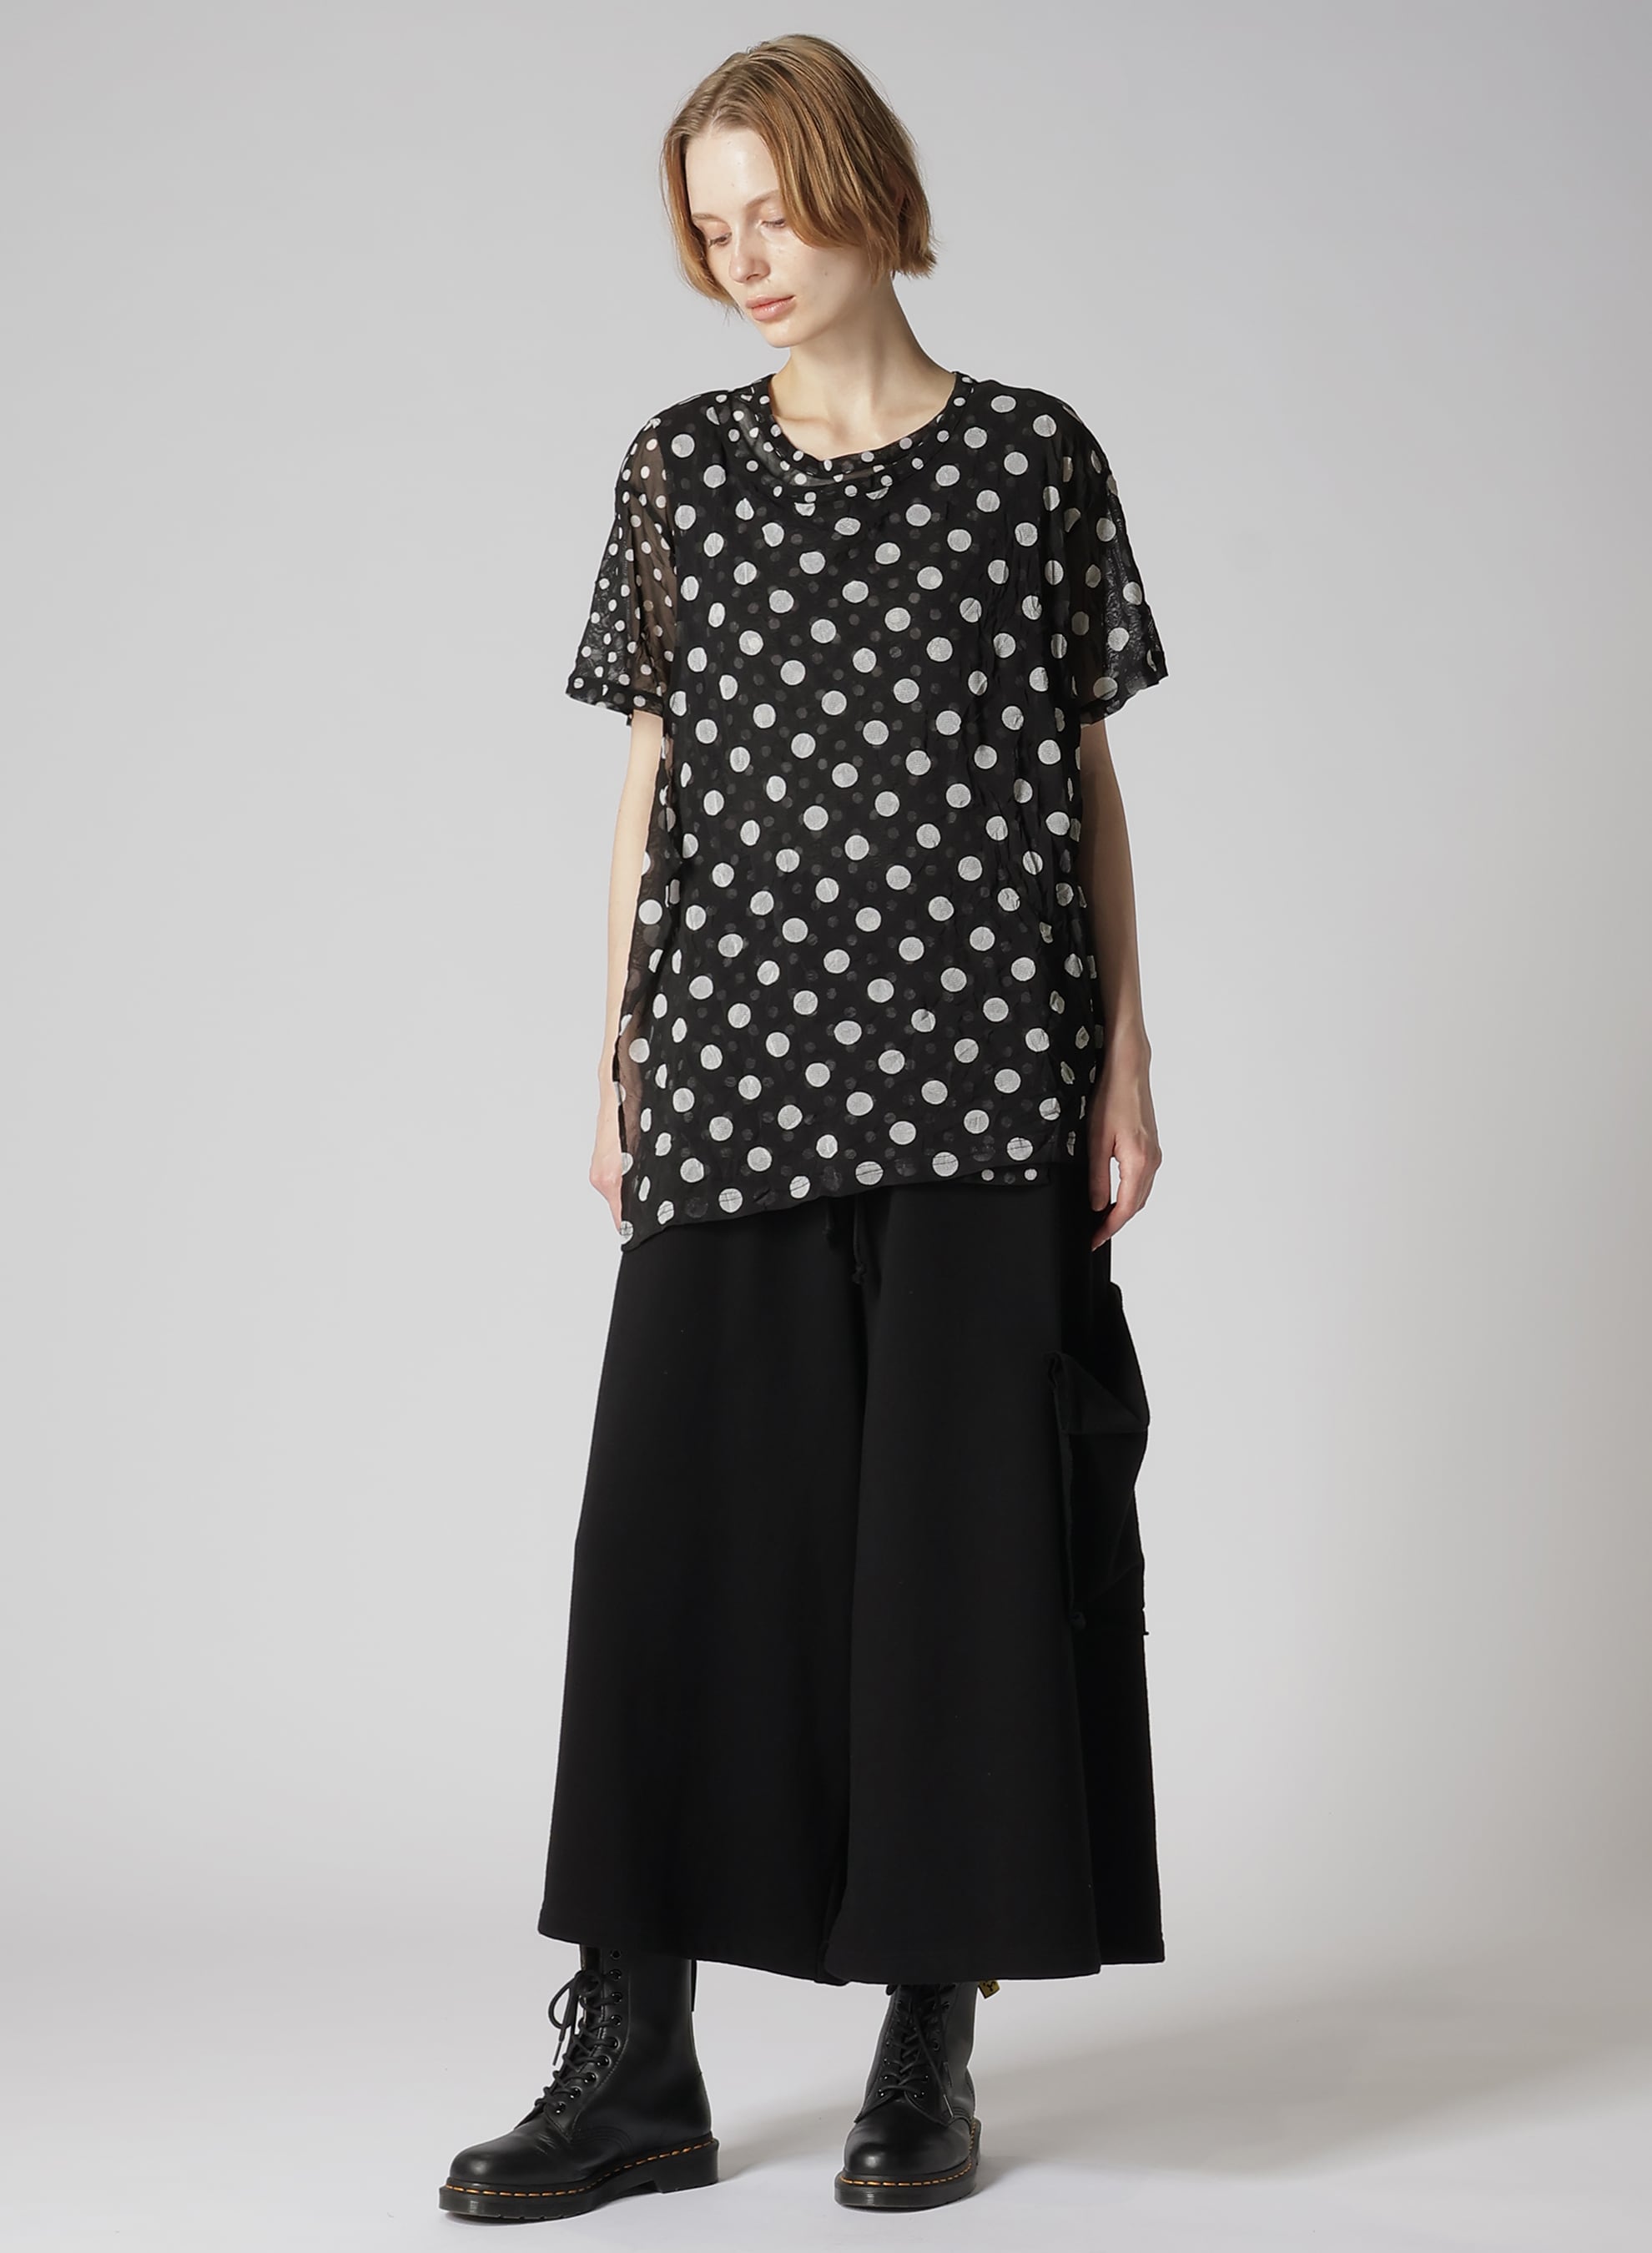 POLYESTER TULLE POLKA DOT HALF SLEEVE T(S Black): Y's｜THE SHOP 